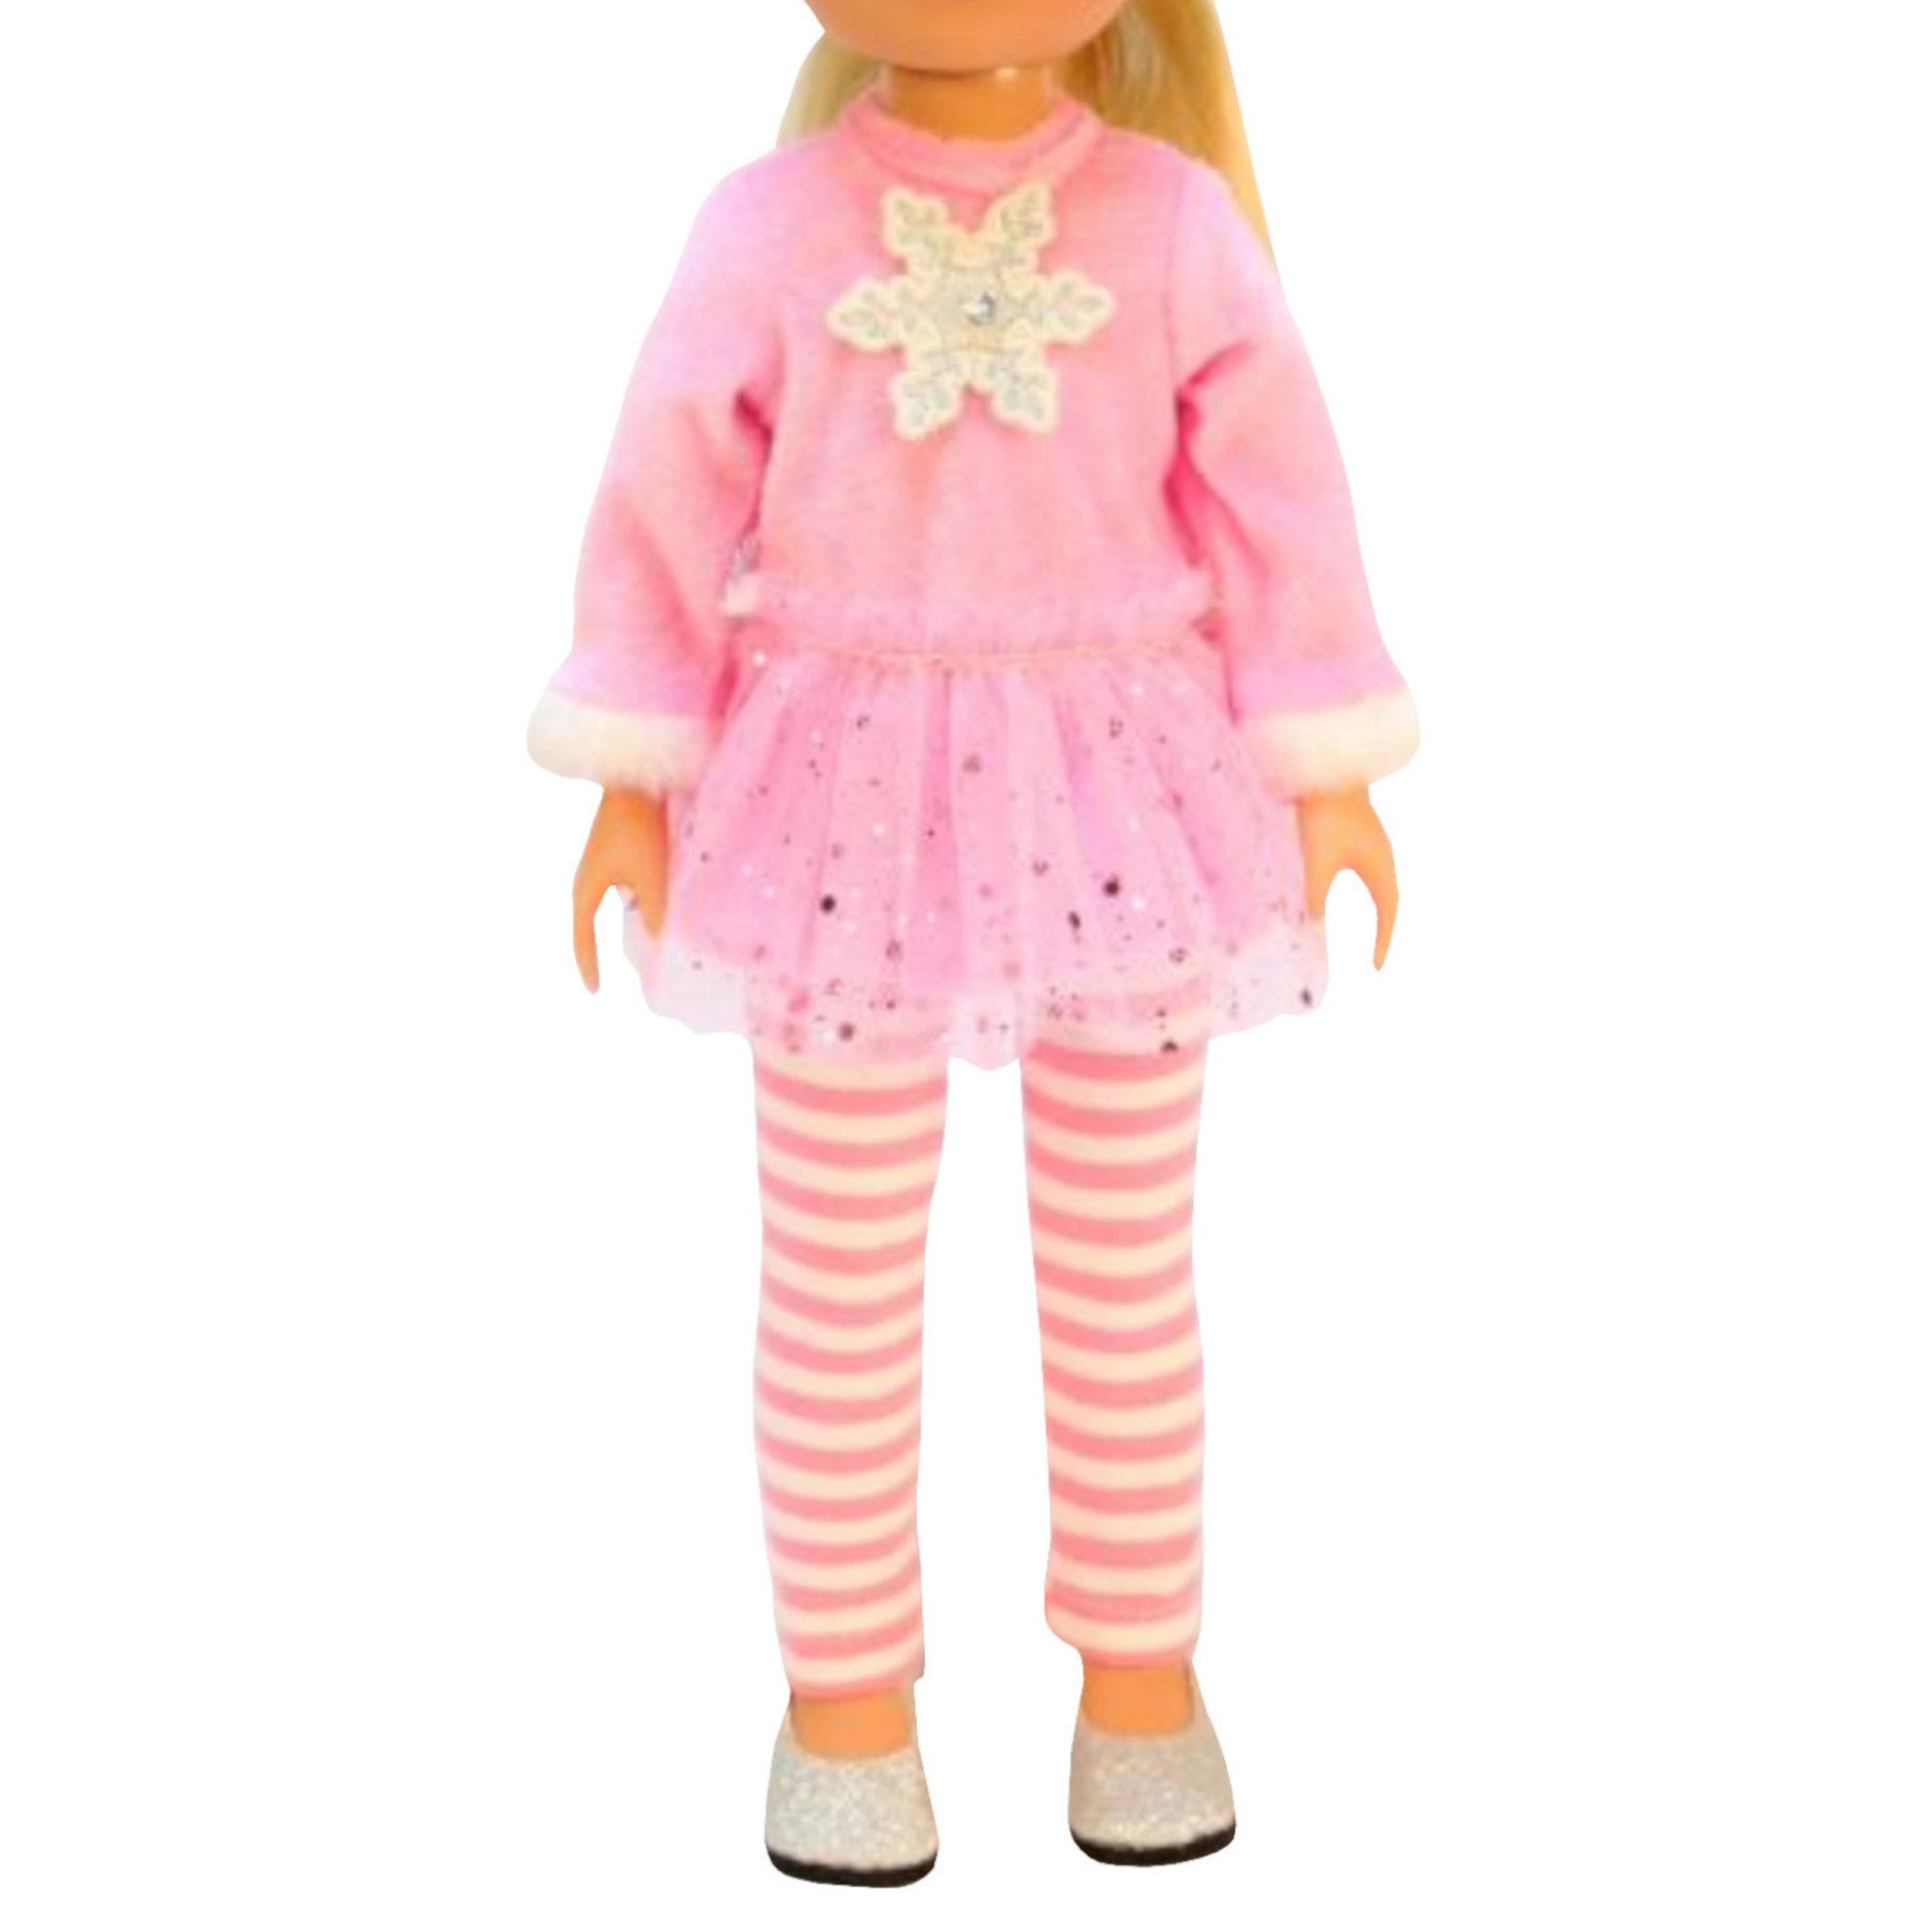 Pink Snowflake Leggings for 14 1/2-inch dolls with doll